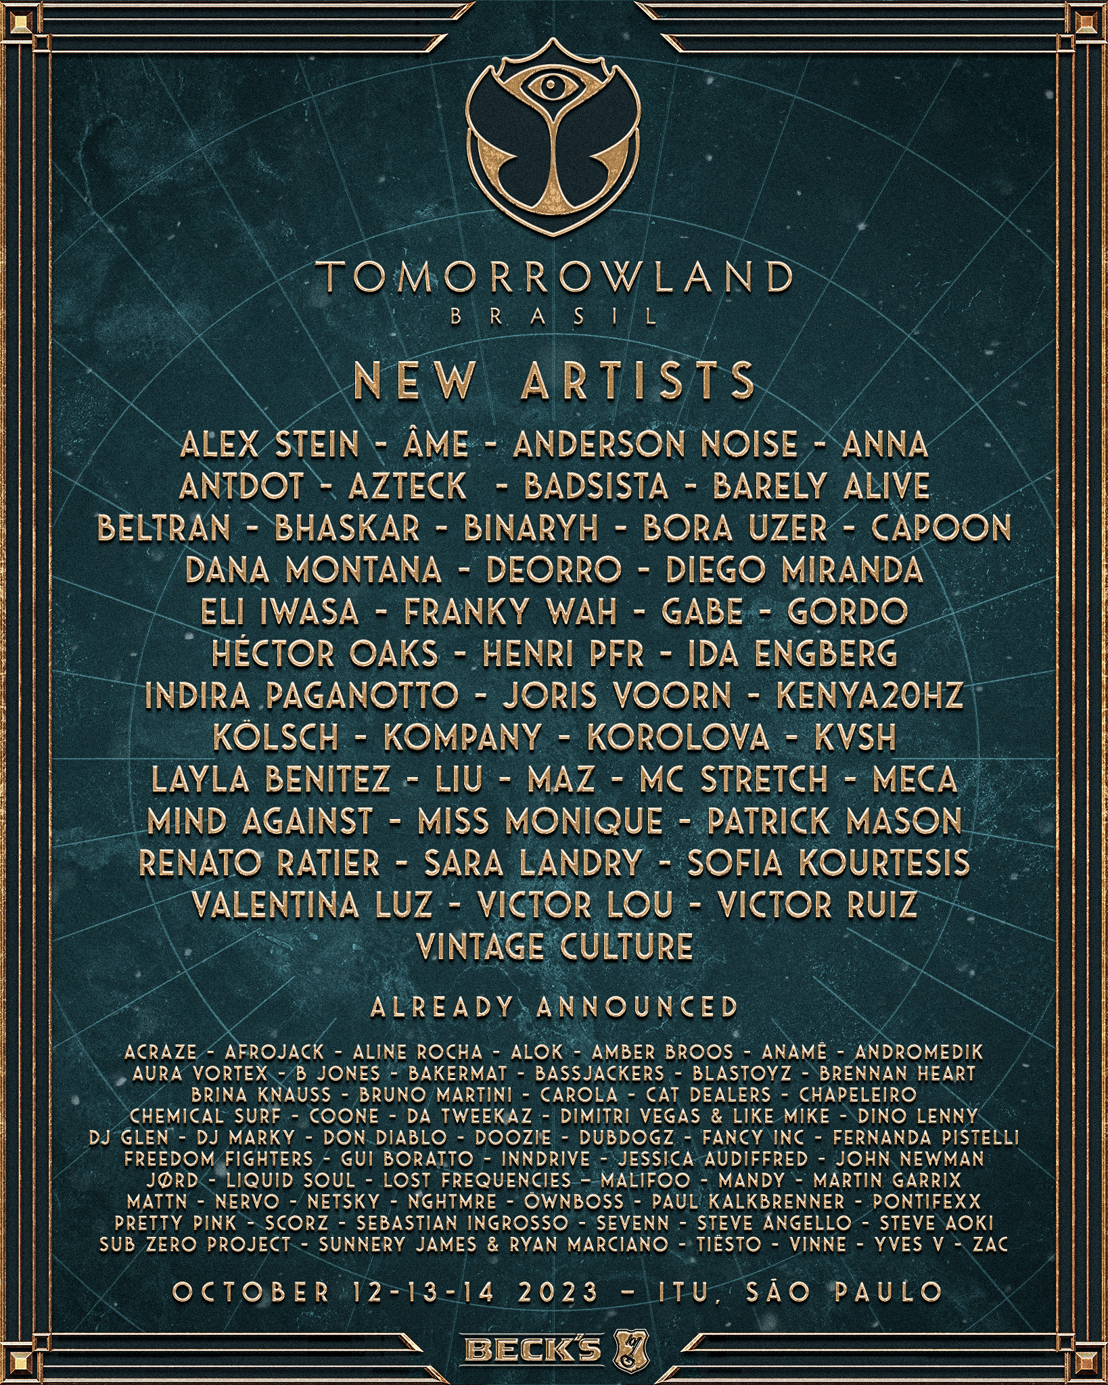 Tomorrowland Brasil adds more than 40 artists to the line-up